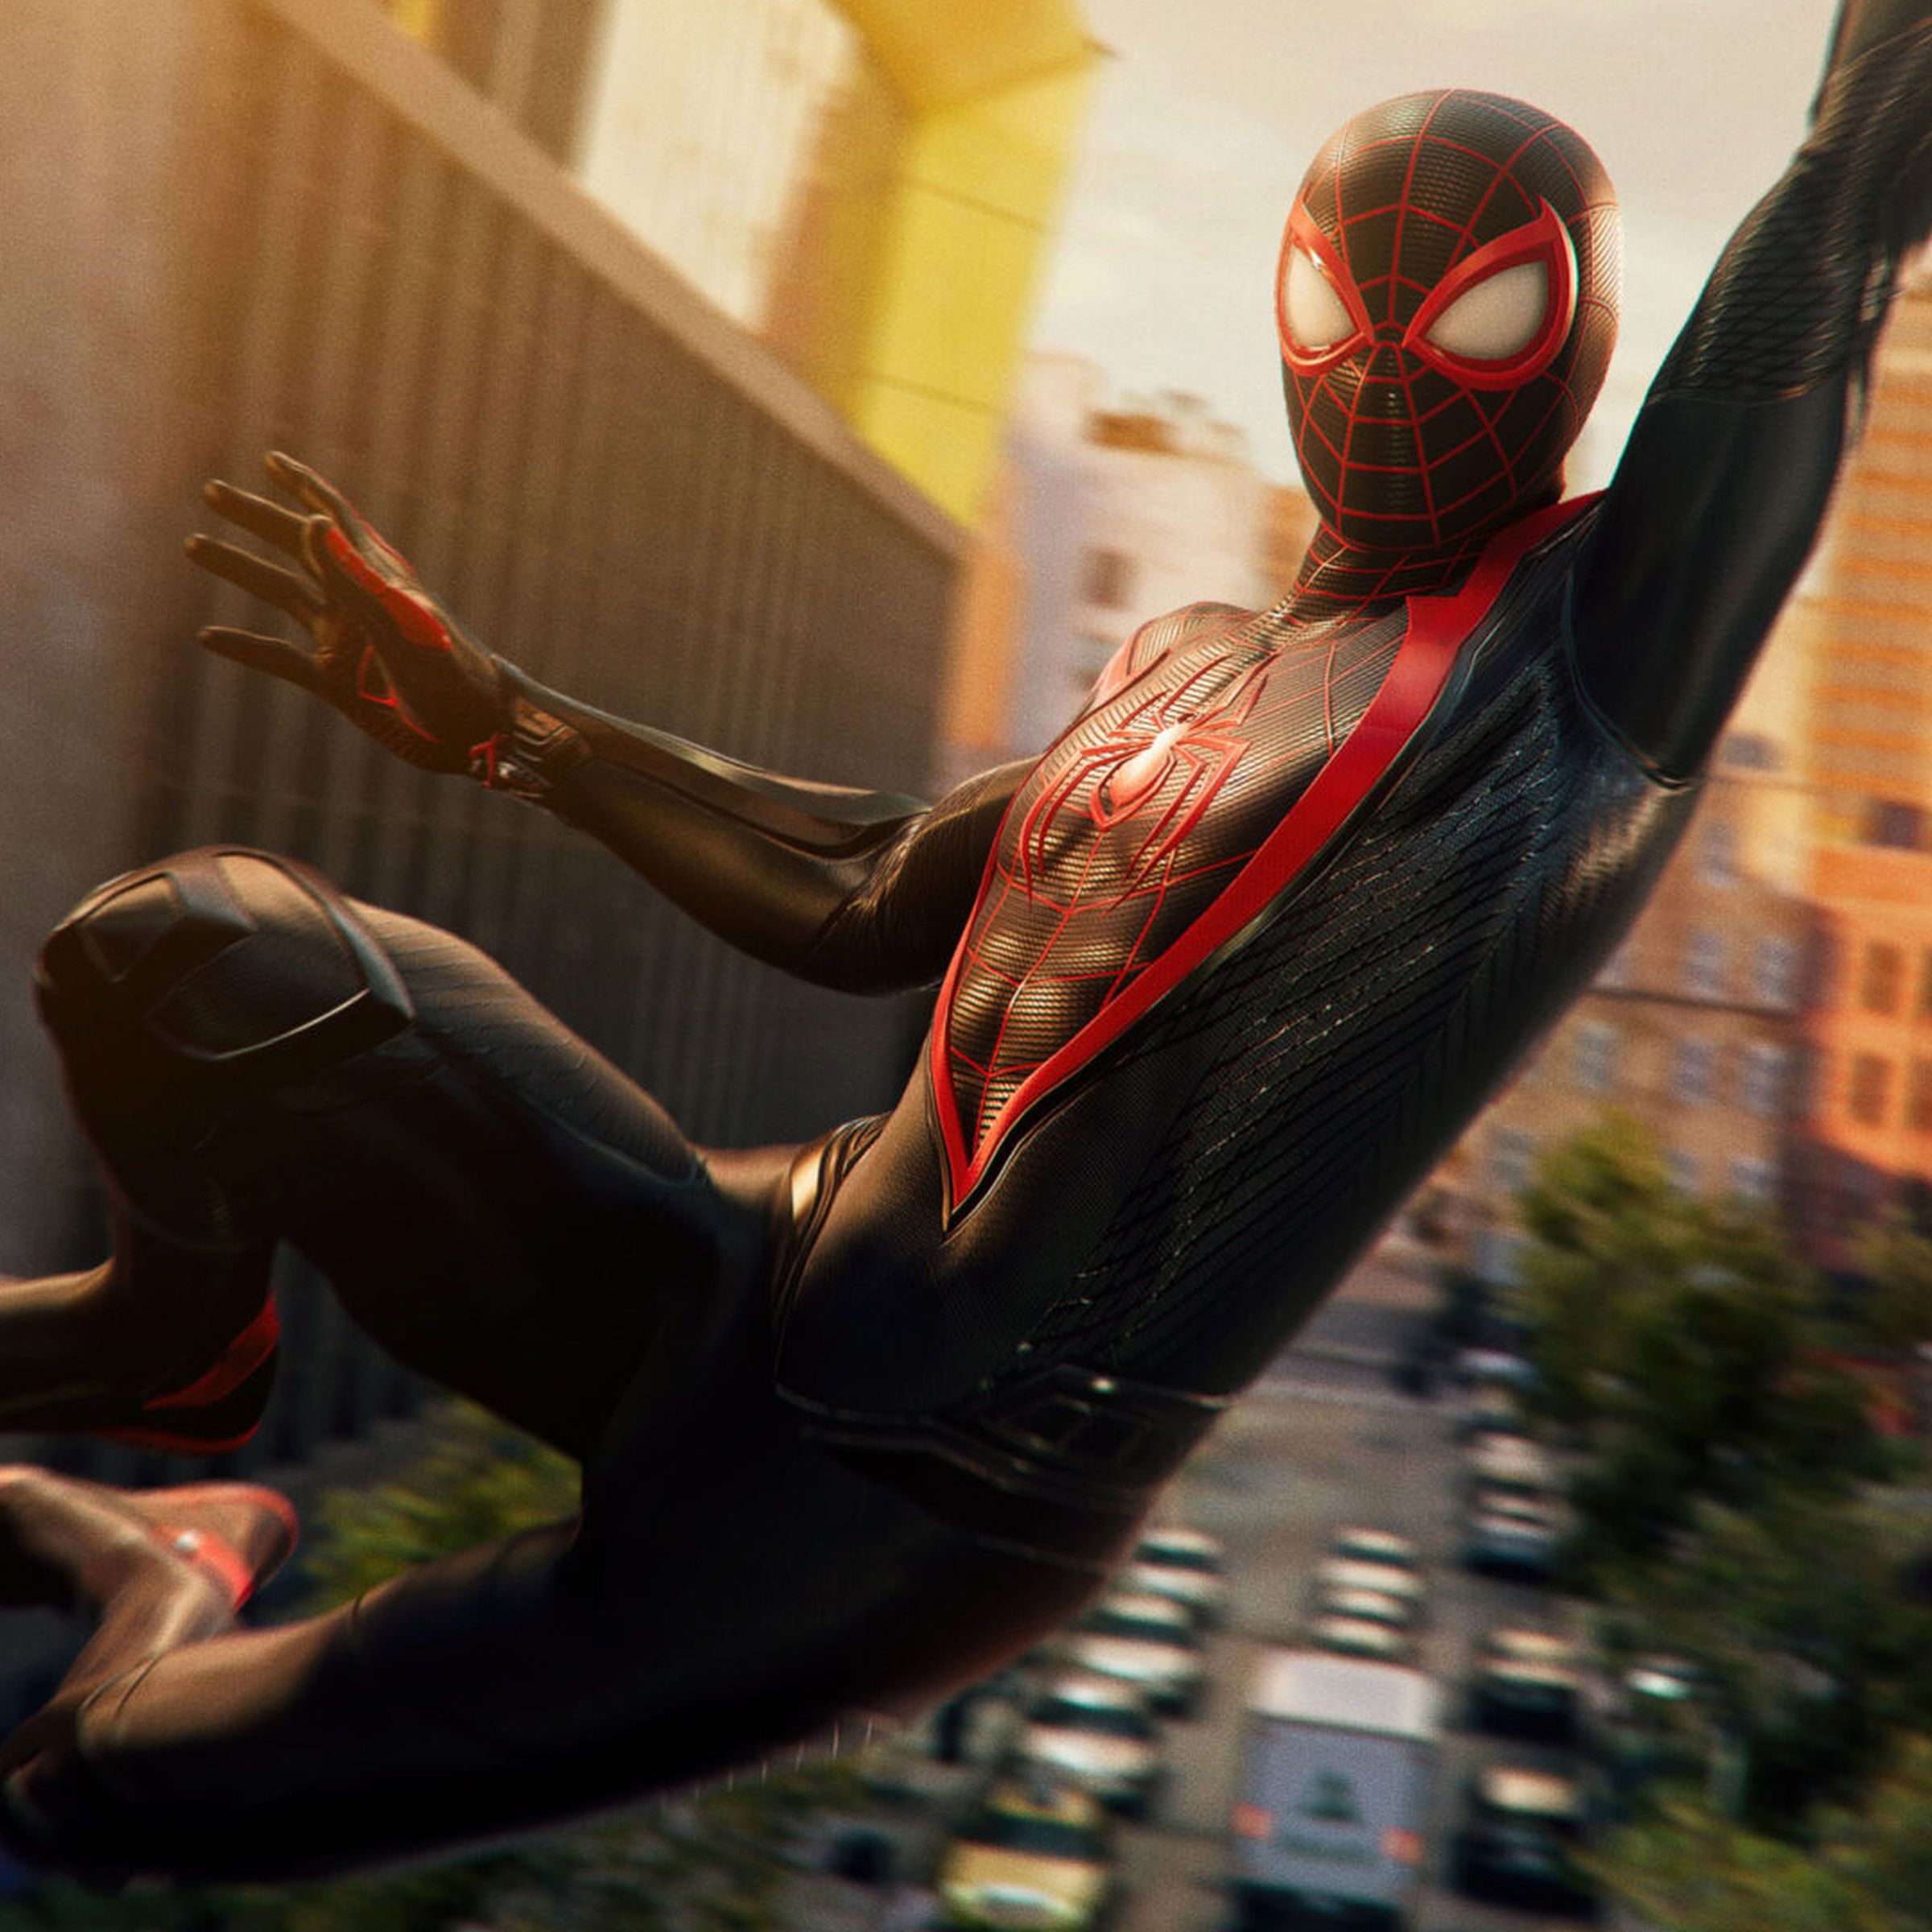 A close-up image of Spider-Man swinging through New York City during sunset.